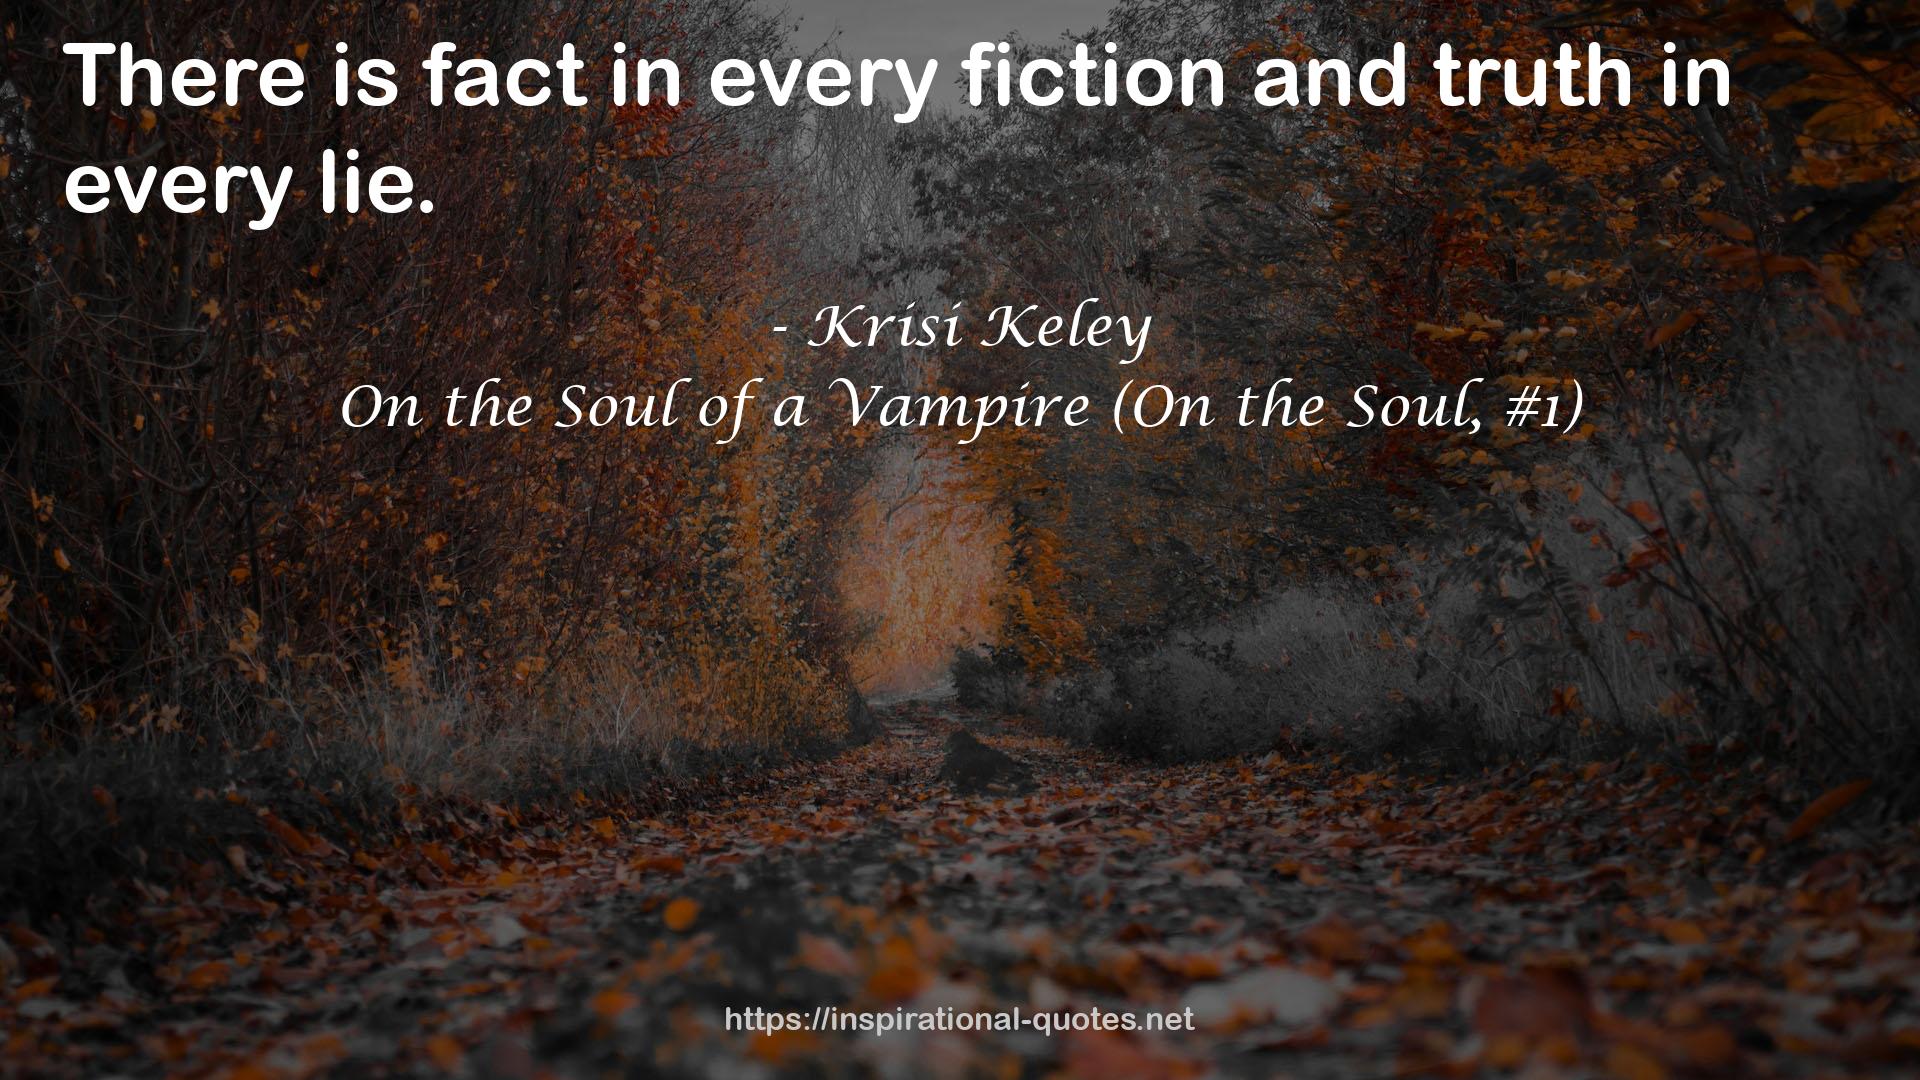 On the Soul of a Vampire (On the Soul, #1) QUOTES